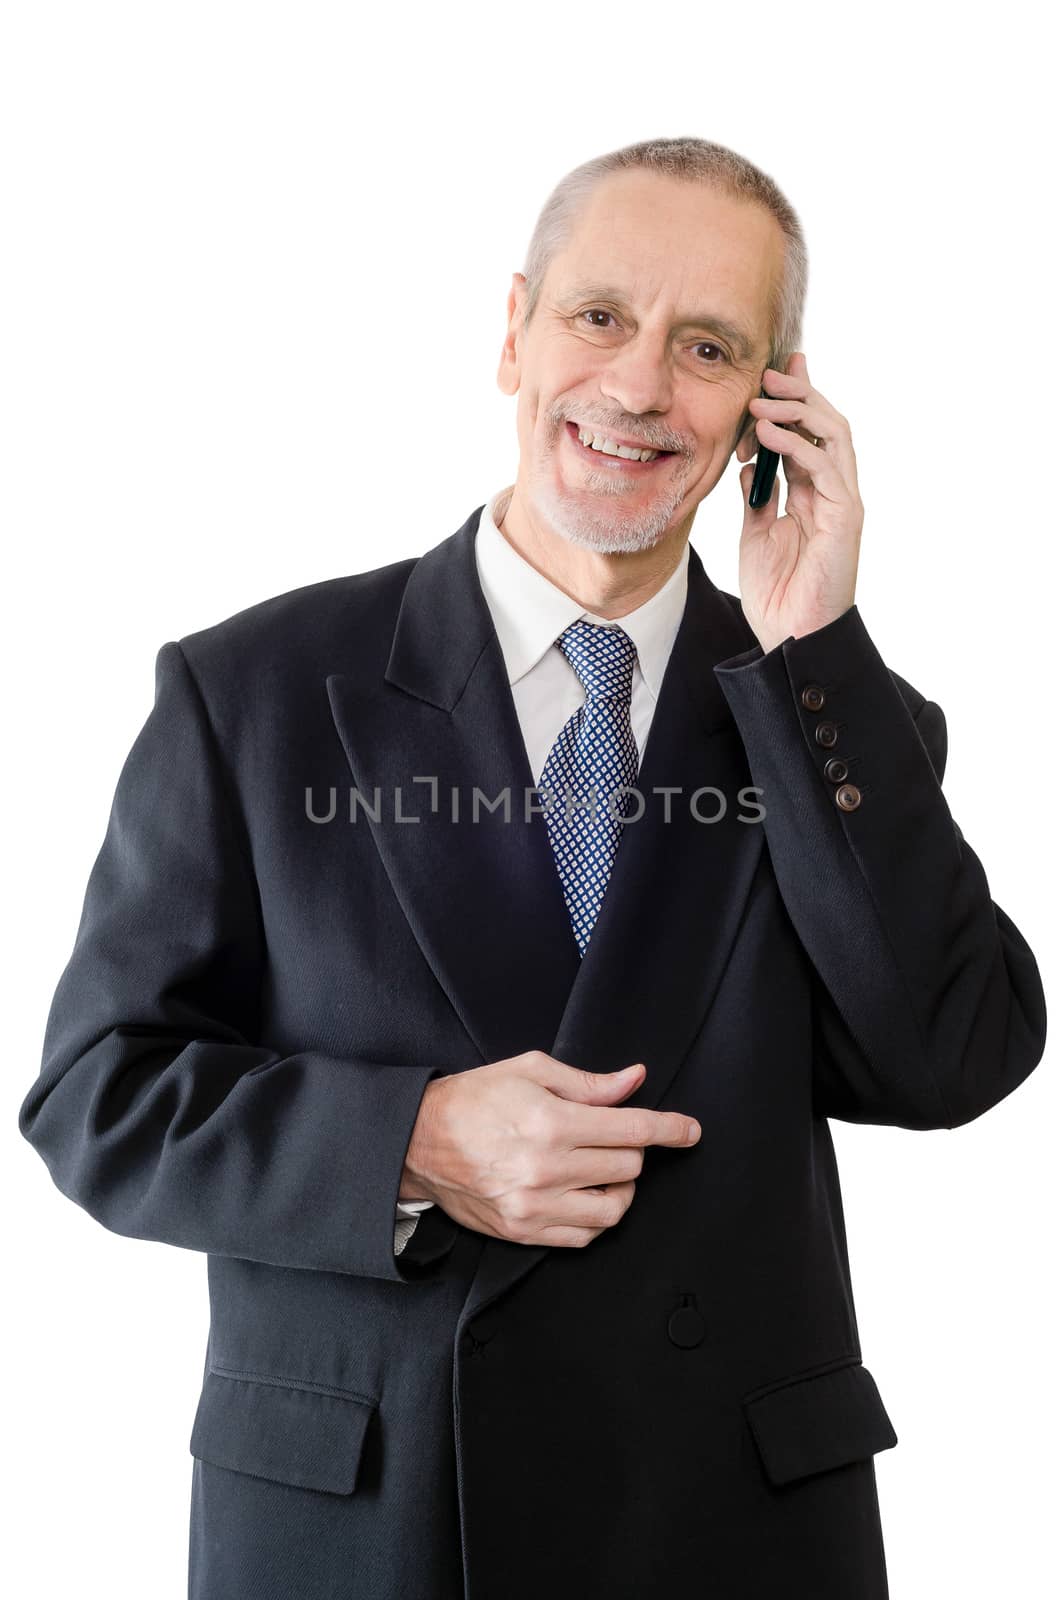 An amiable businessman smiling on mobile phone